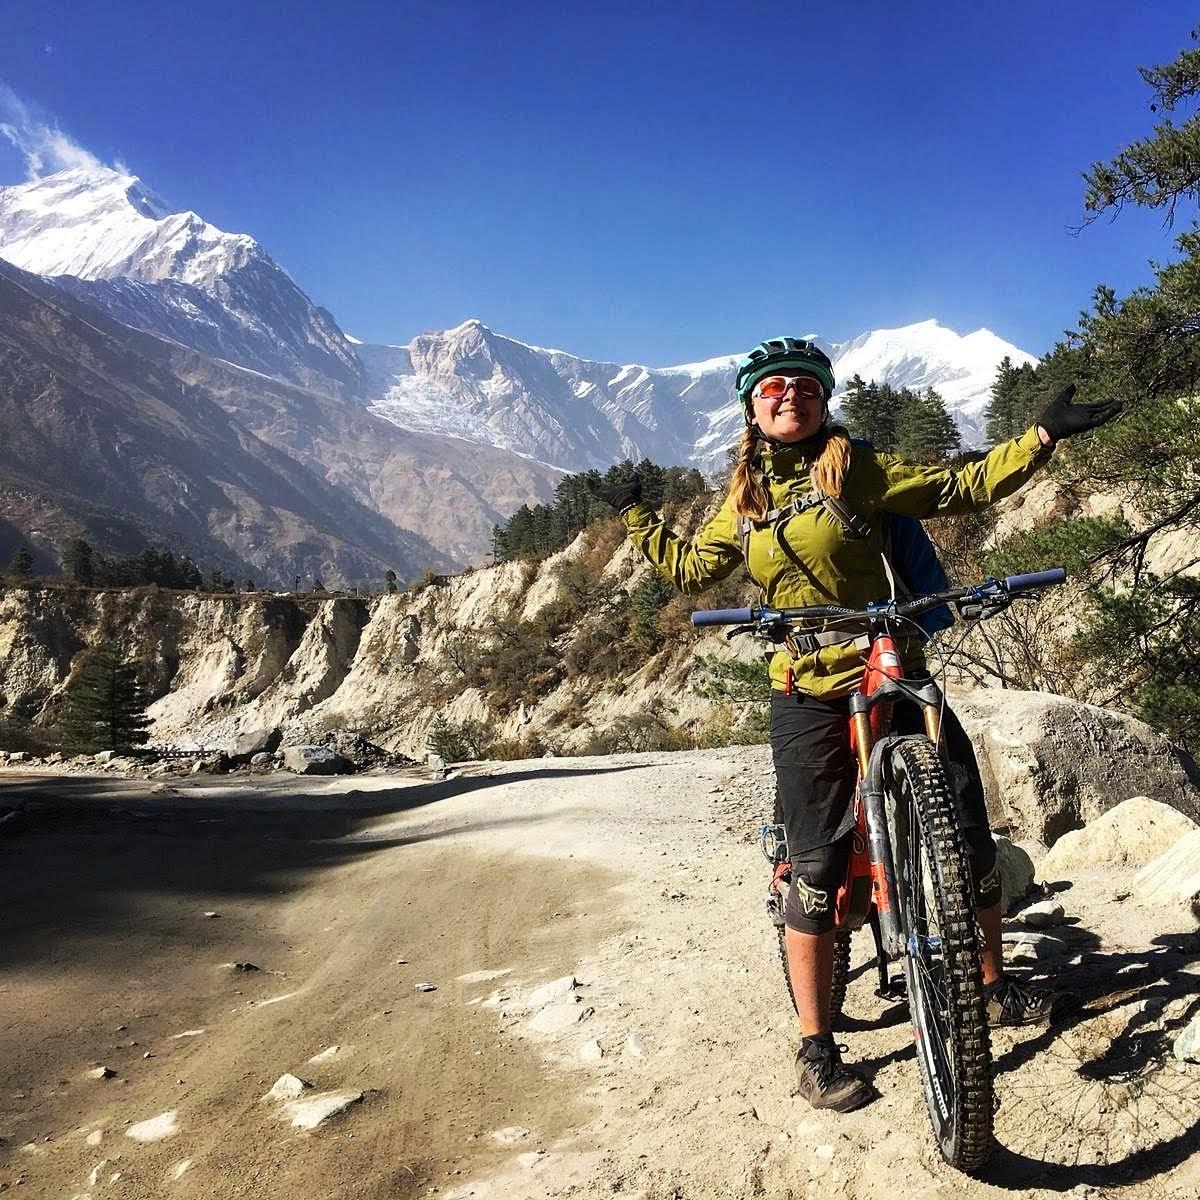 A mountain biker in green jacket expresses her happiness with the view of Dhaulagiri on the background.